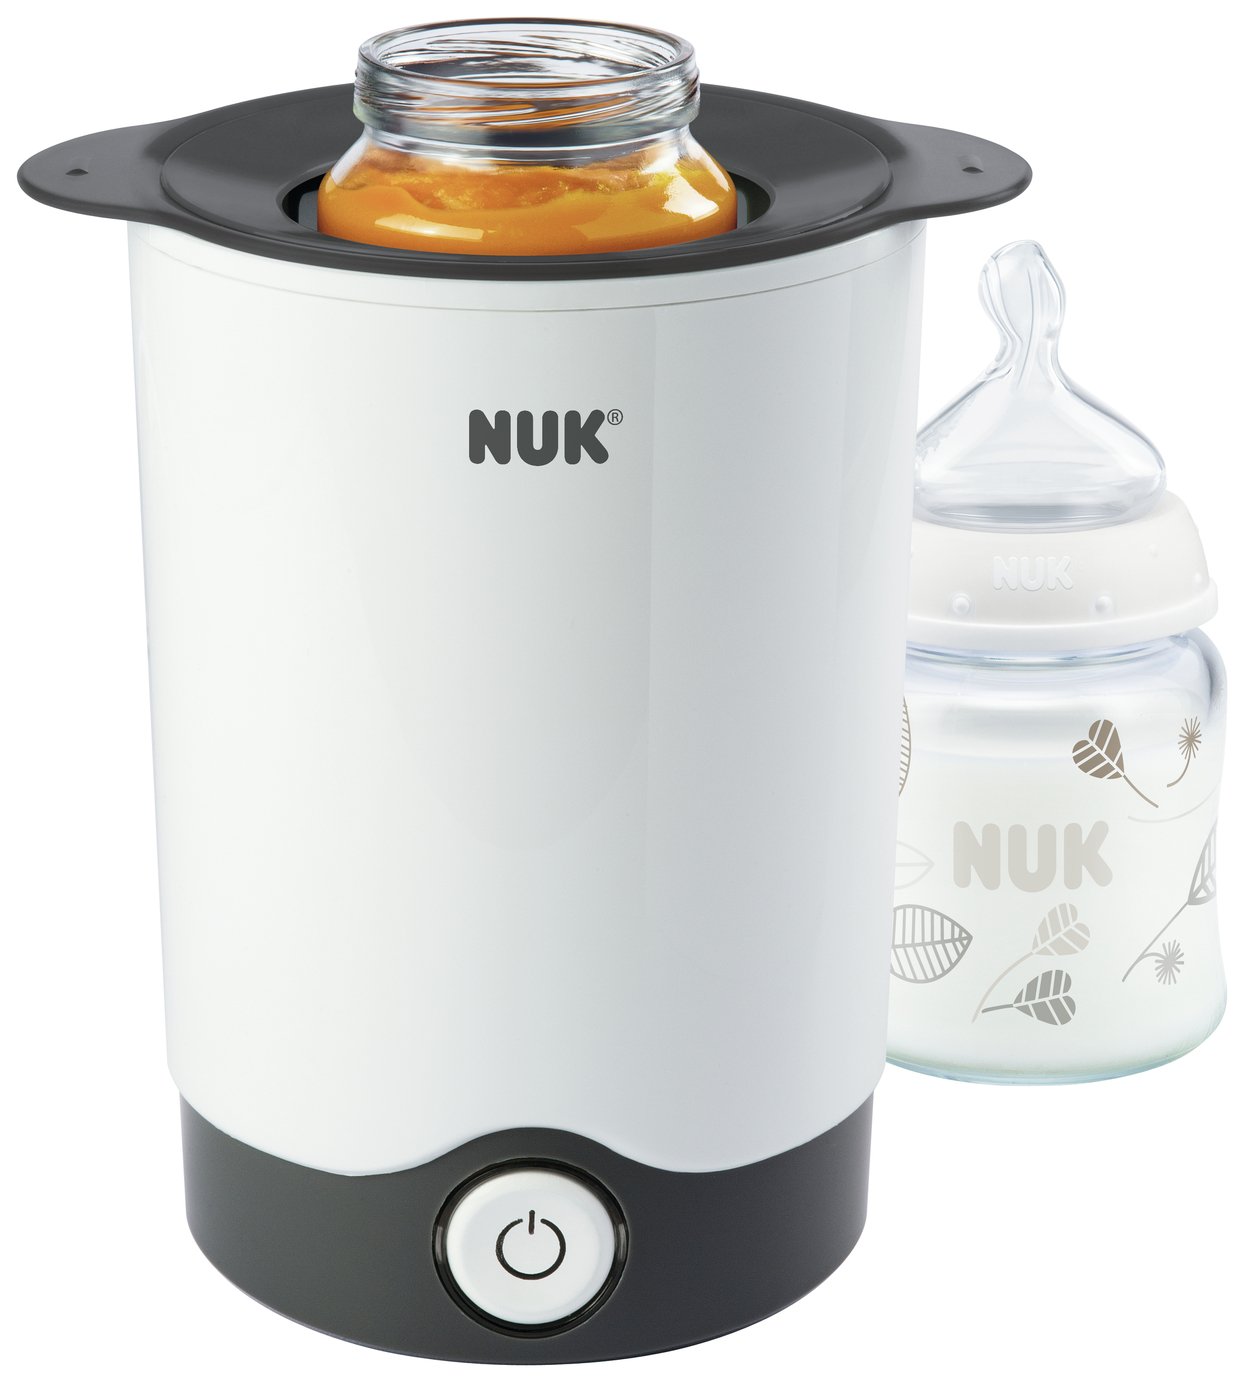 NUK Thermo Express Bottle Warmer Review